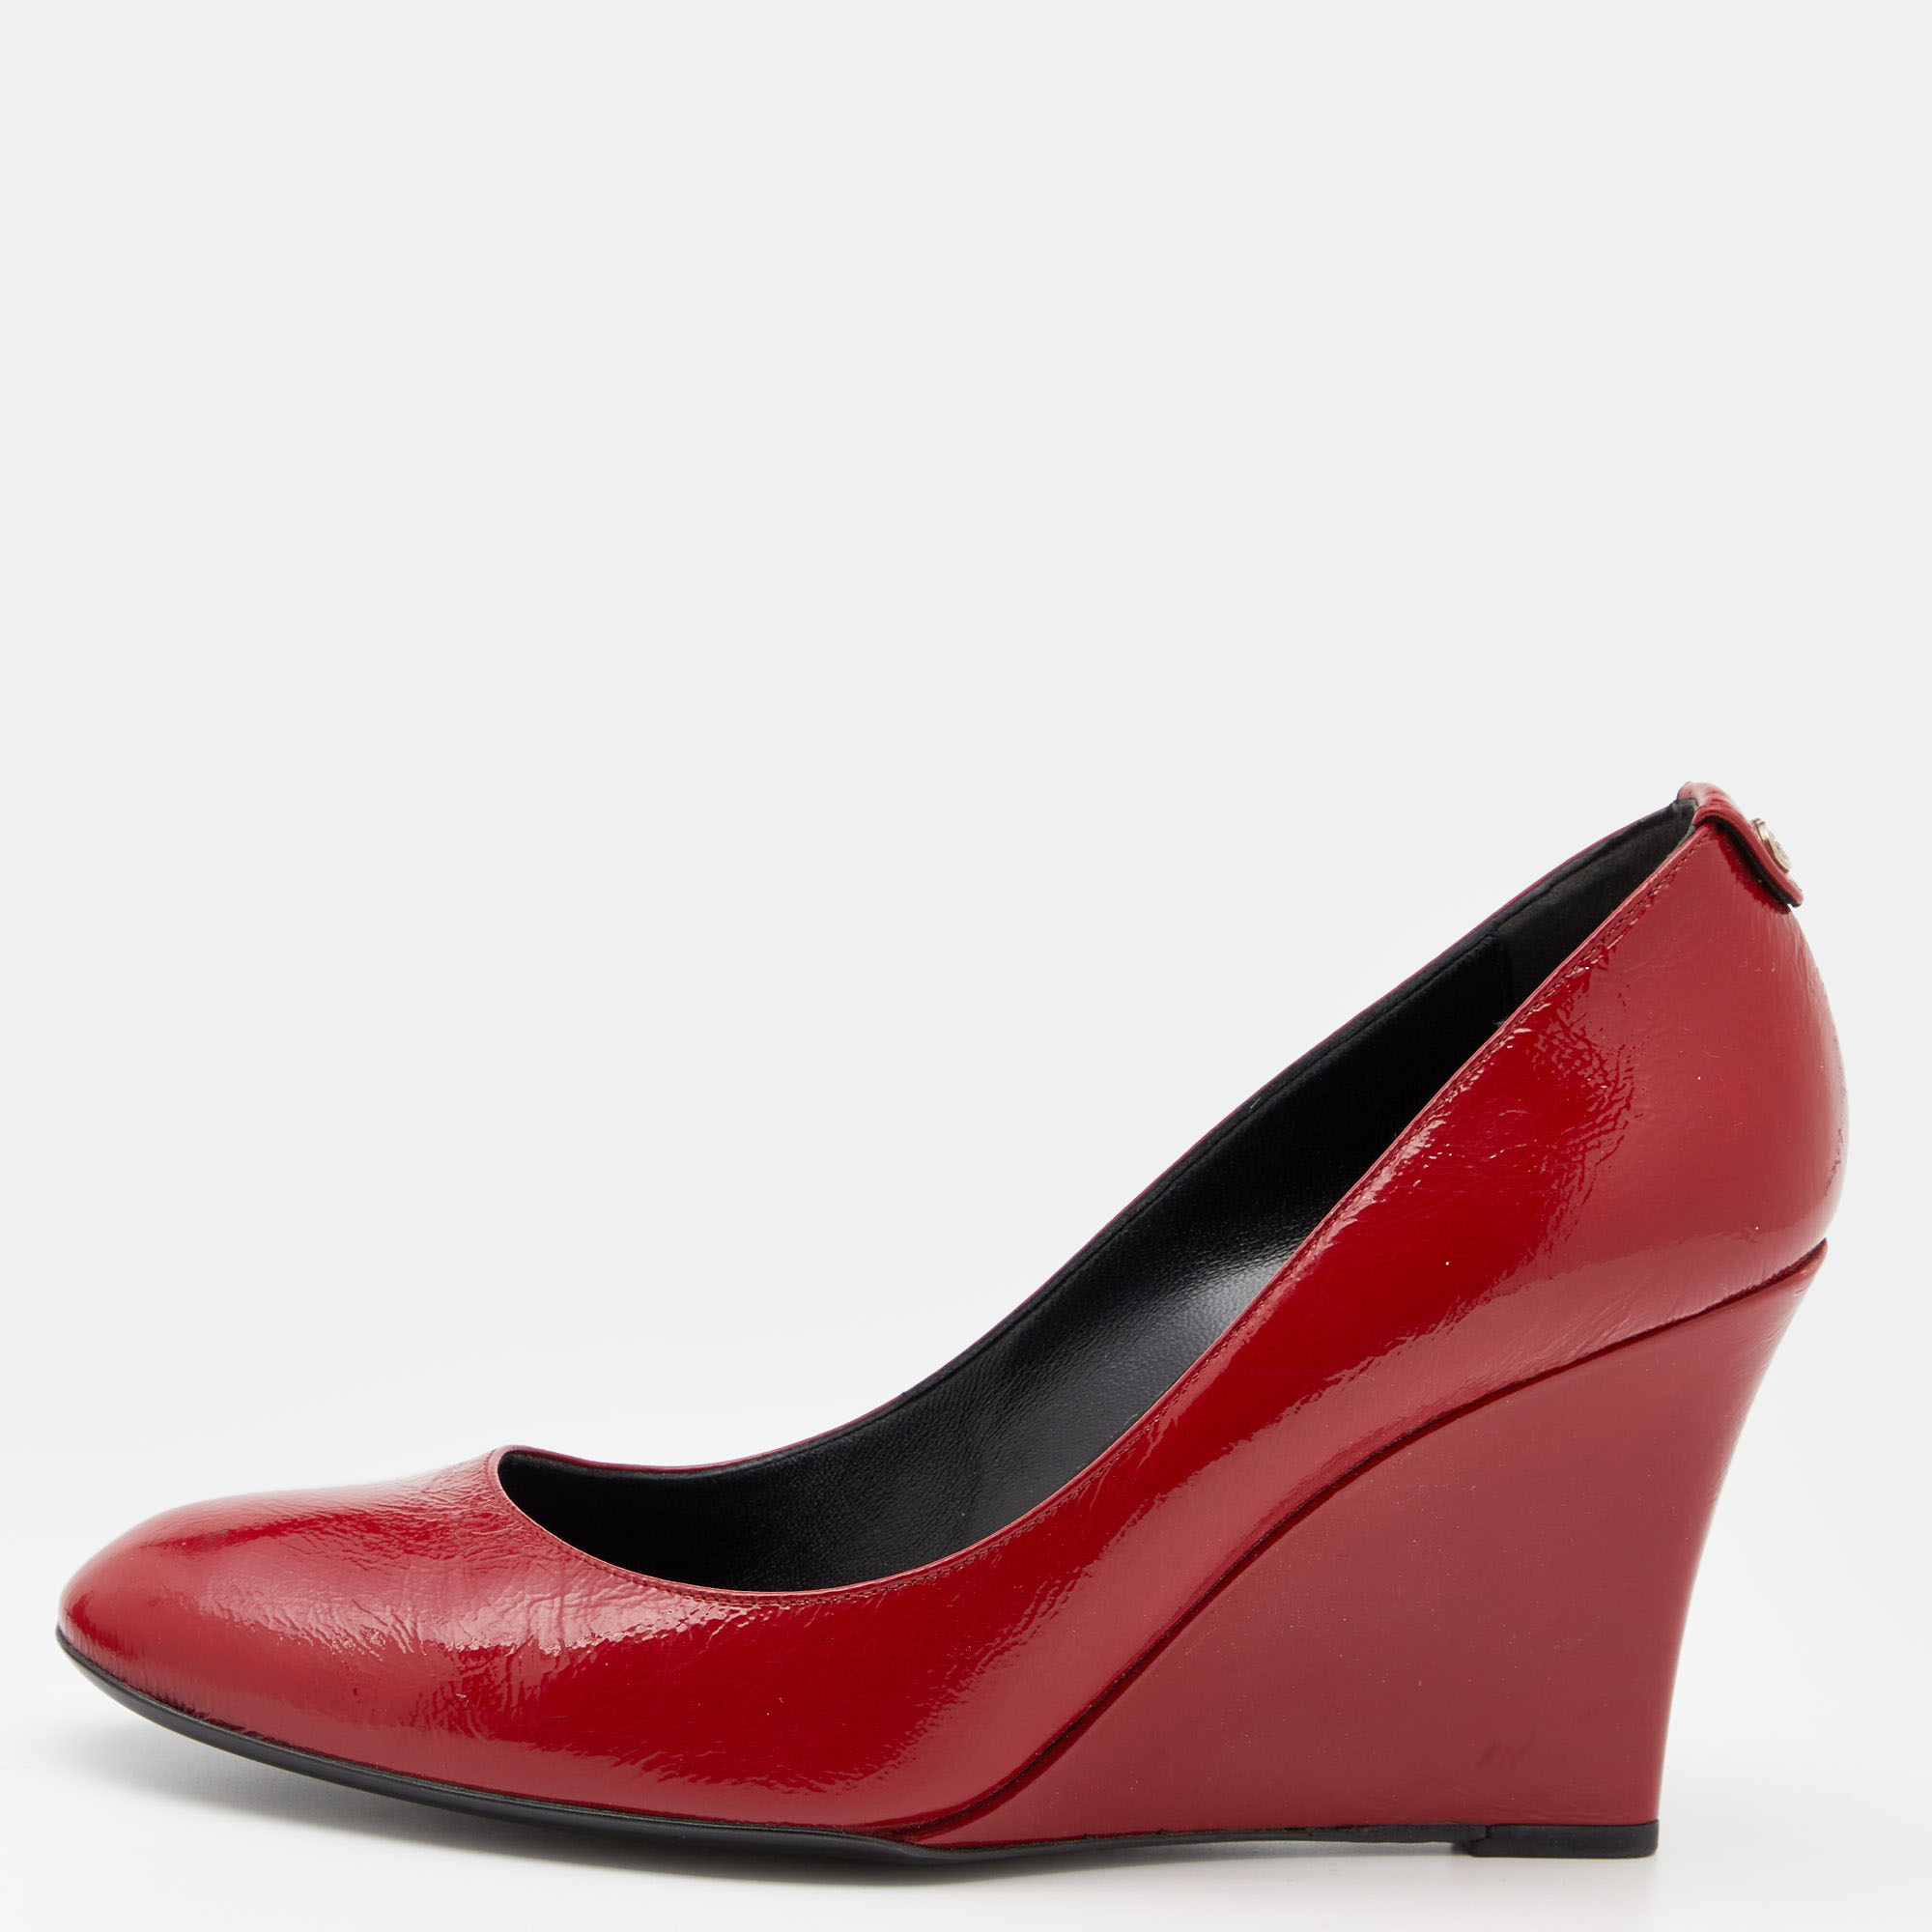 There are some shoes that stand the test of time and fashion cycles these timeless Gucci pumps are the ones. Crafted from patent leather in a versatile red shade they are designed with sleek cuts round toes and wedge heels.